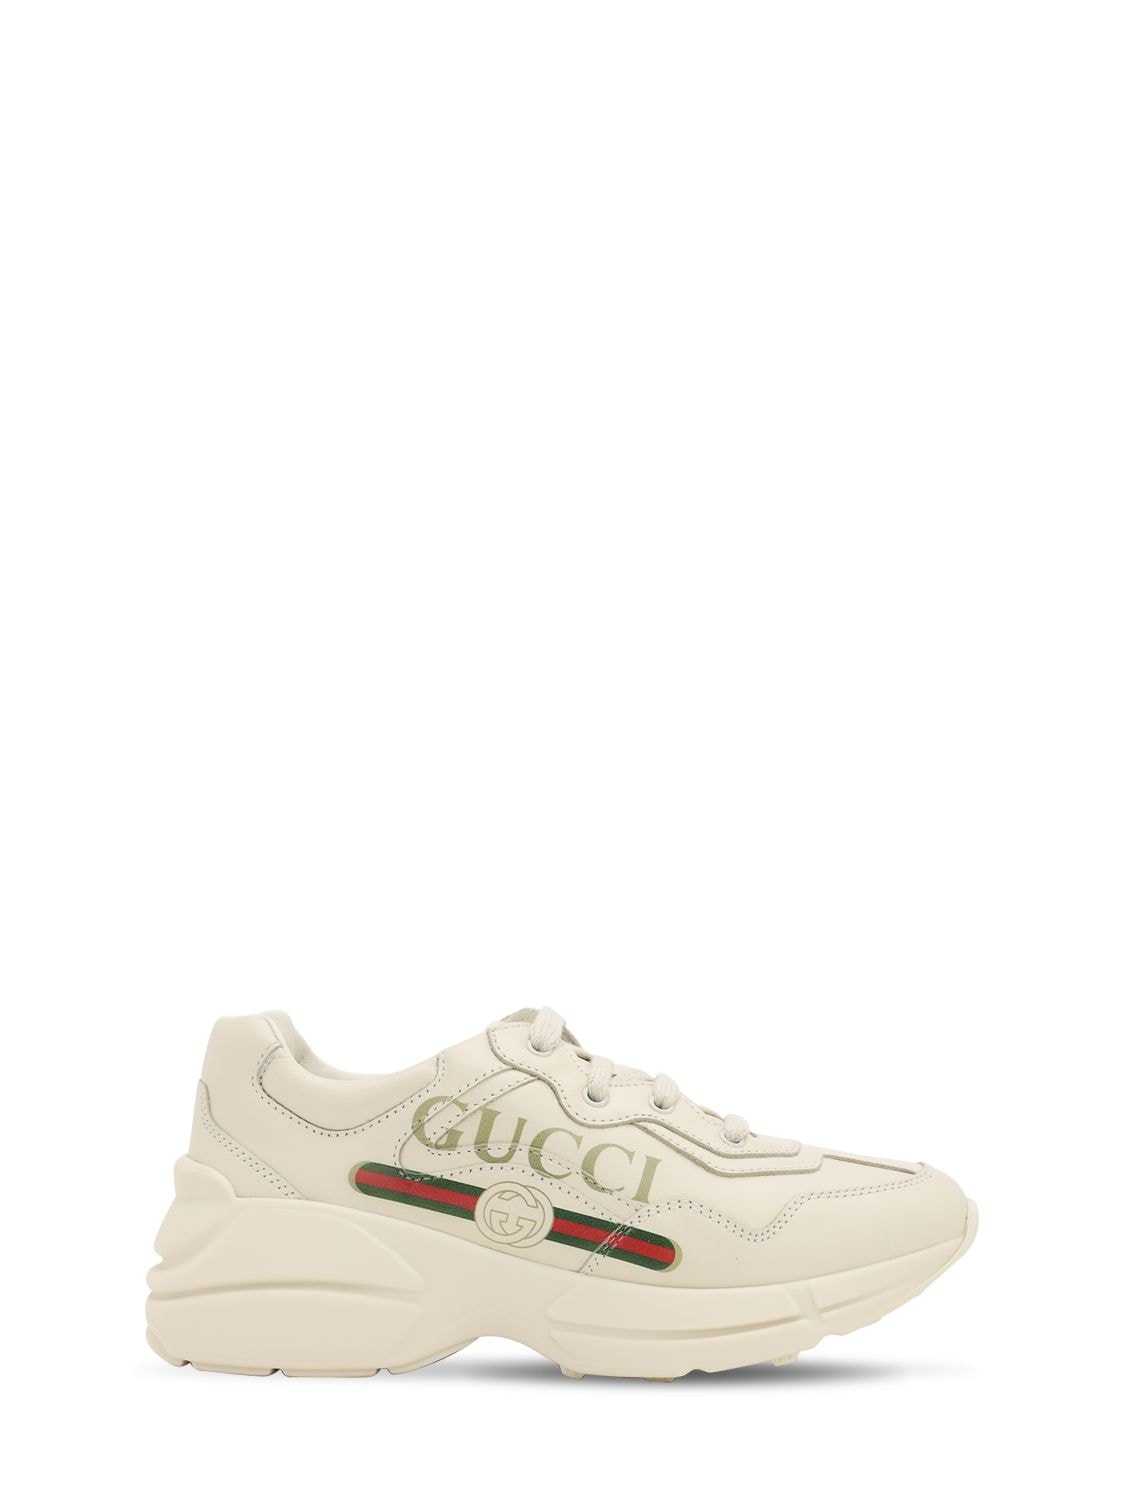 Shop Gucci Logo Print Leather Sneakers In White